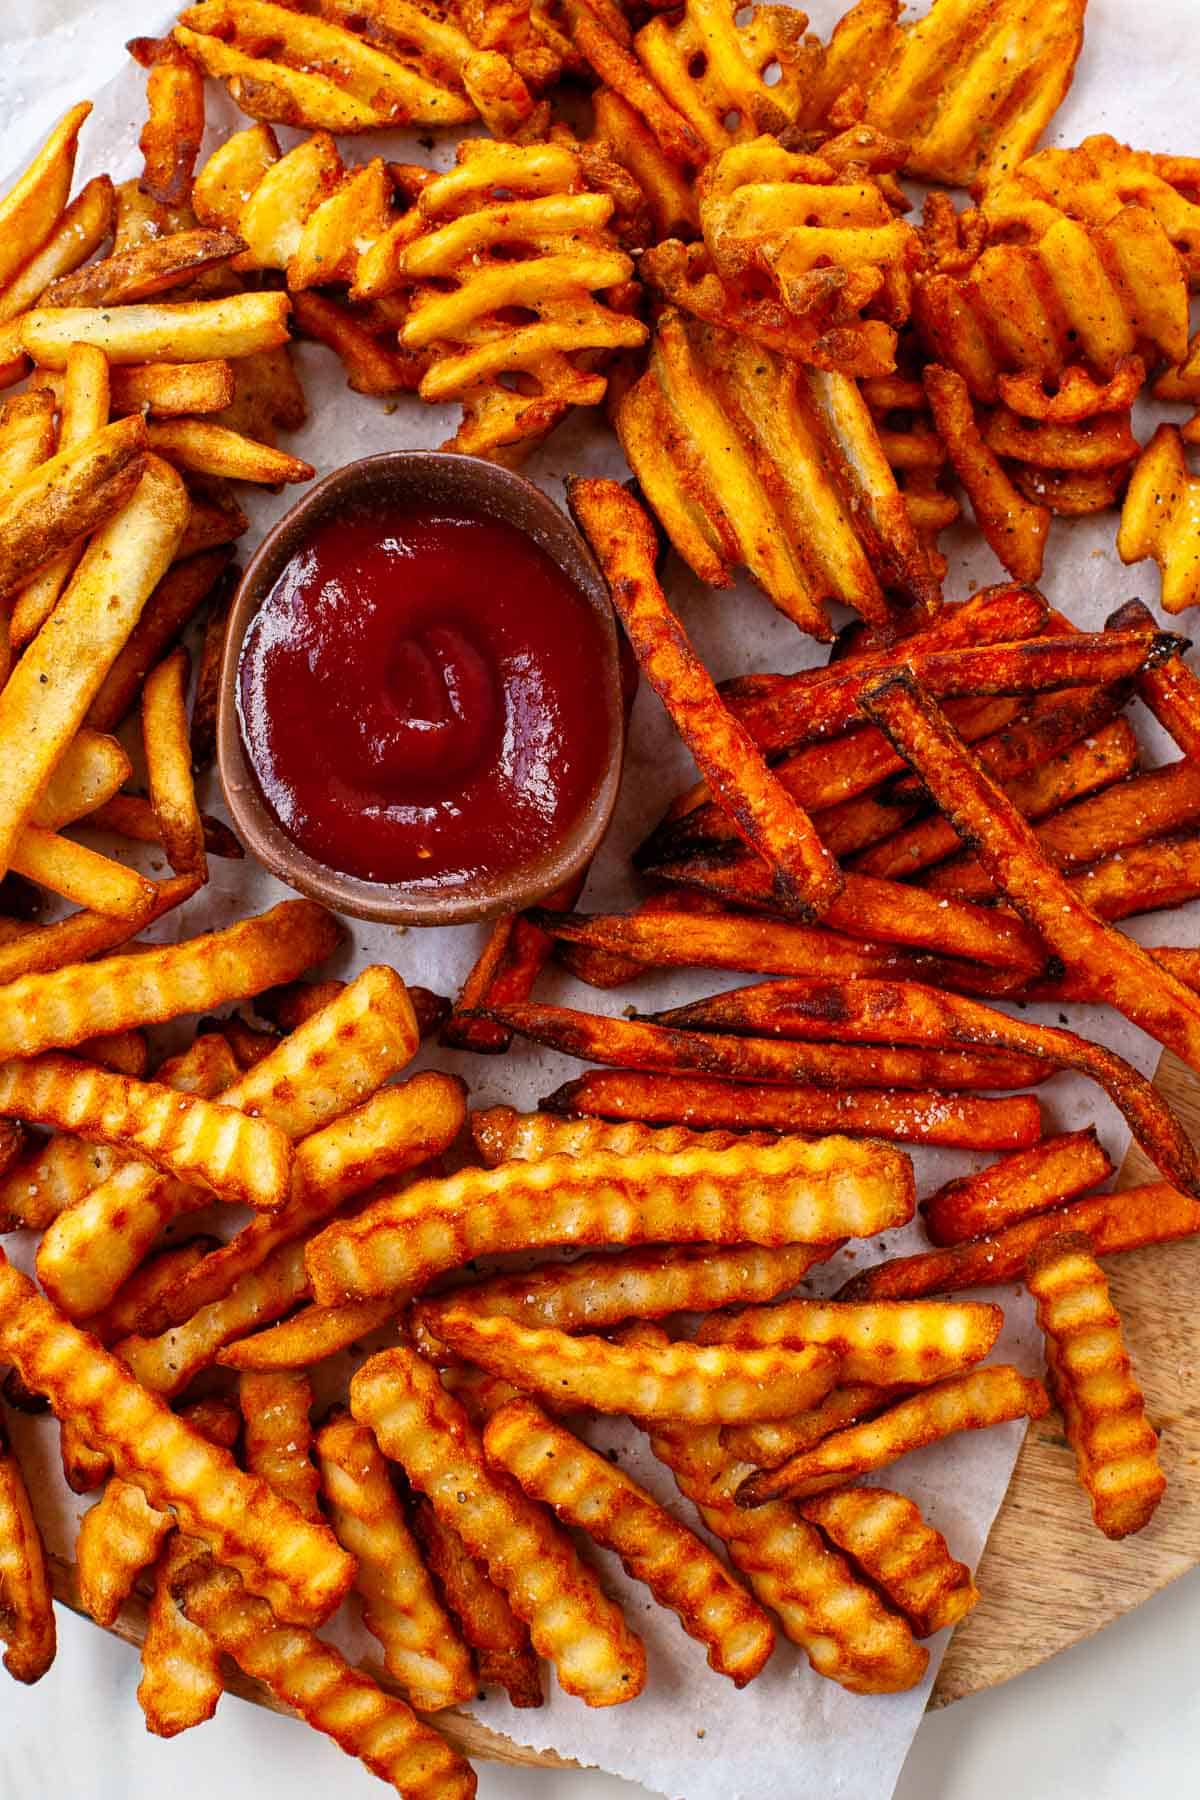 How to Make Crispy Frozen French Fries in an Air Fryer: Easy, Quick, and Delicious